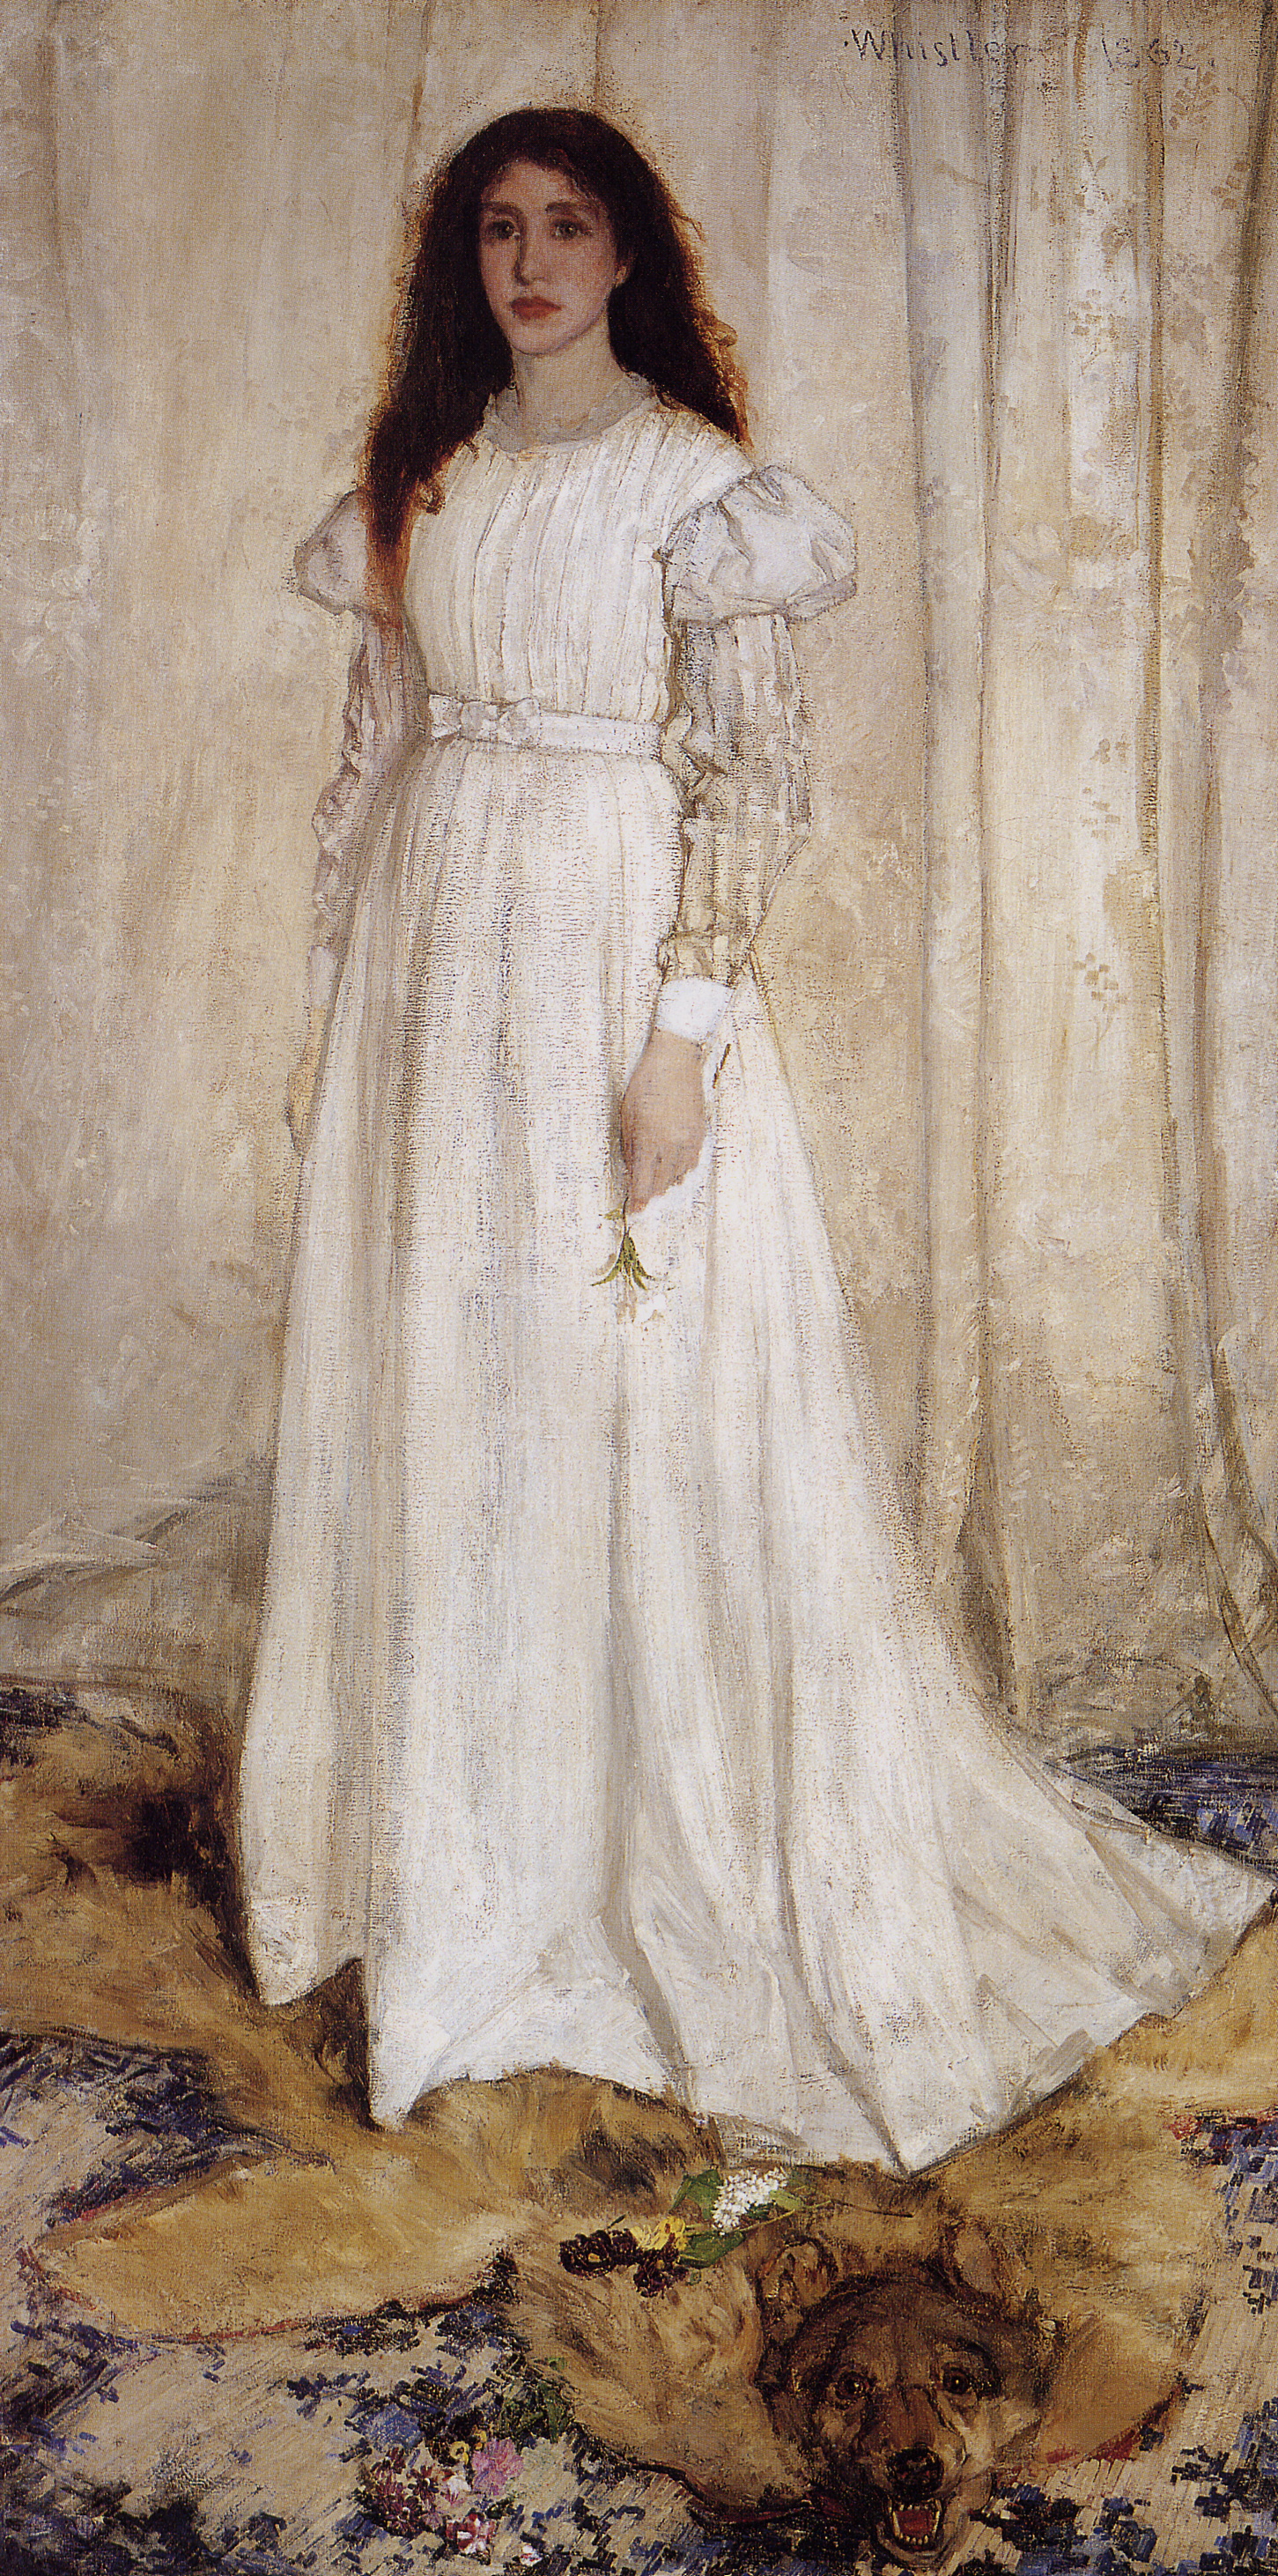 Symphony in White, No. 1: The White Girl by James Abbott McNeill Whistler - 1861-1862 - 215 × 108 cm National Gallery of Art